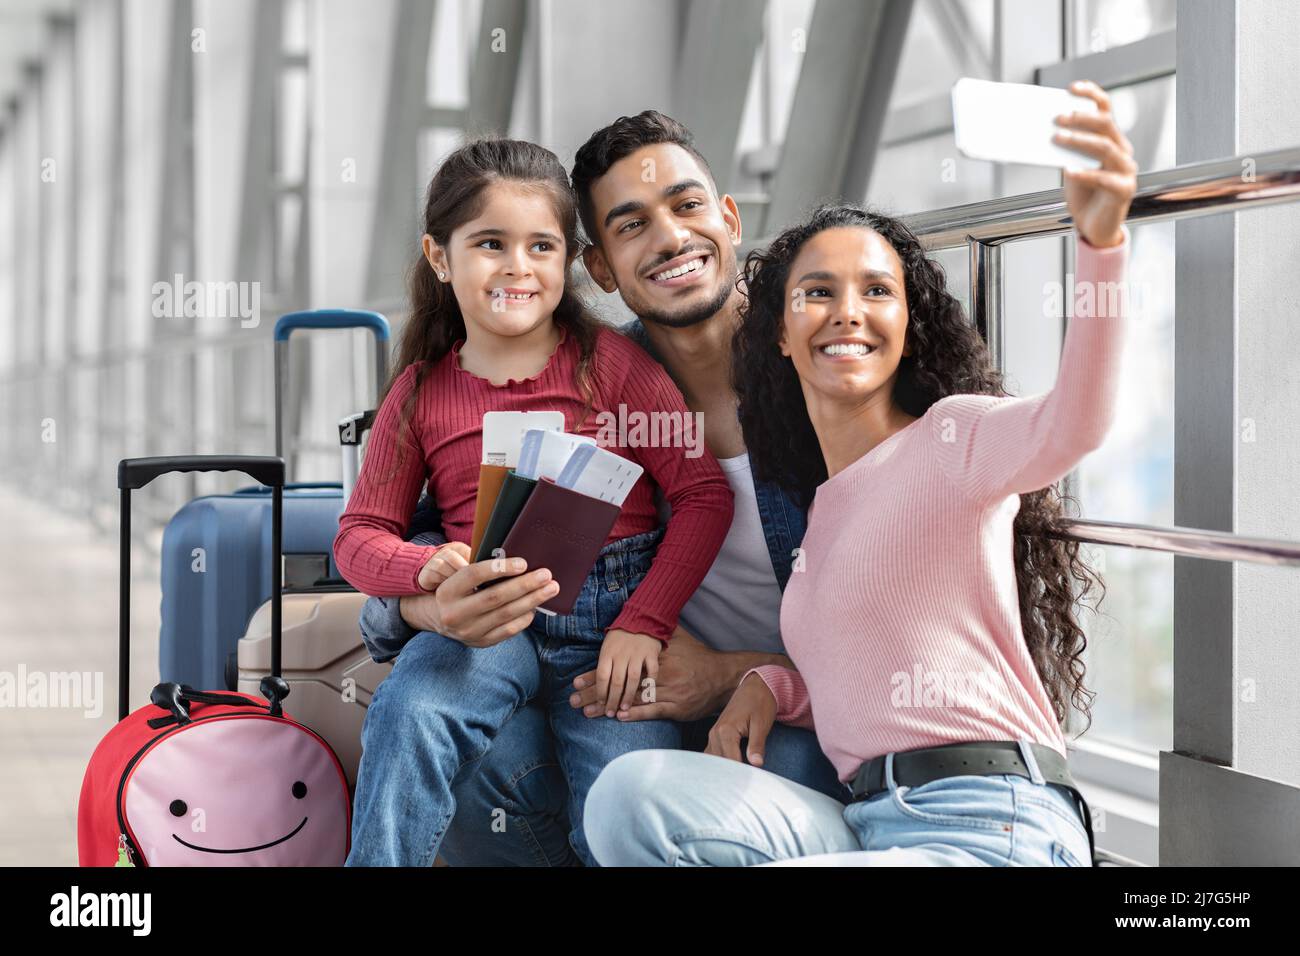 Airport Selfie . Happy Middle Eastern Family Of Three Taking Photo With Smartphone Stock Photo